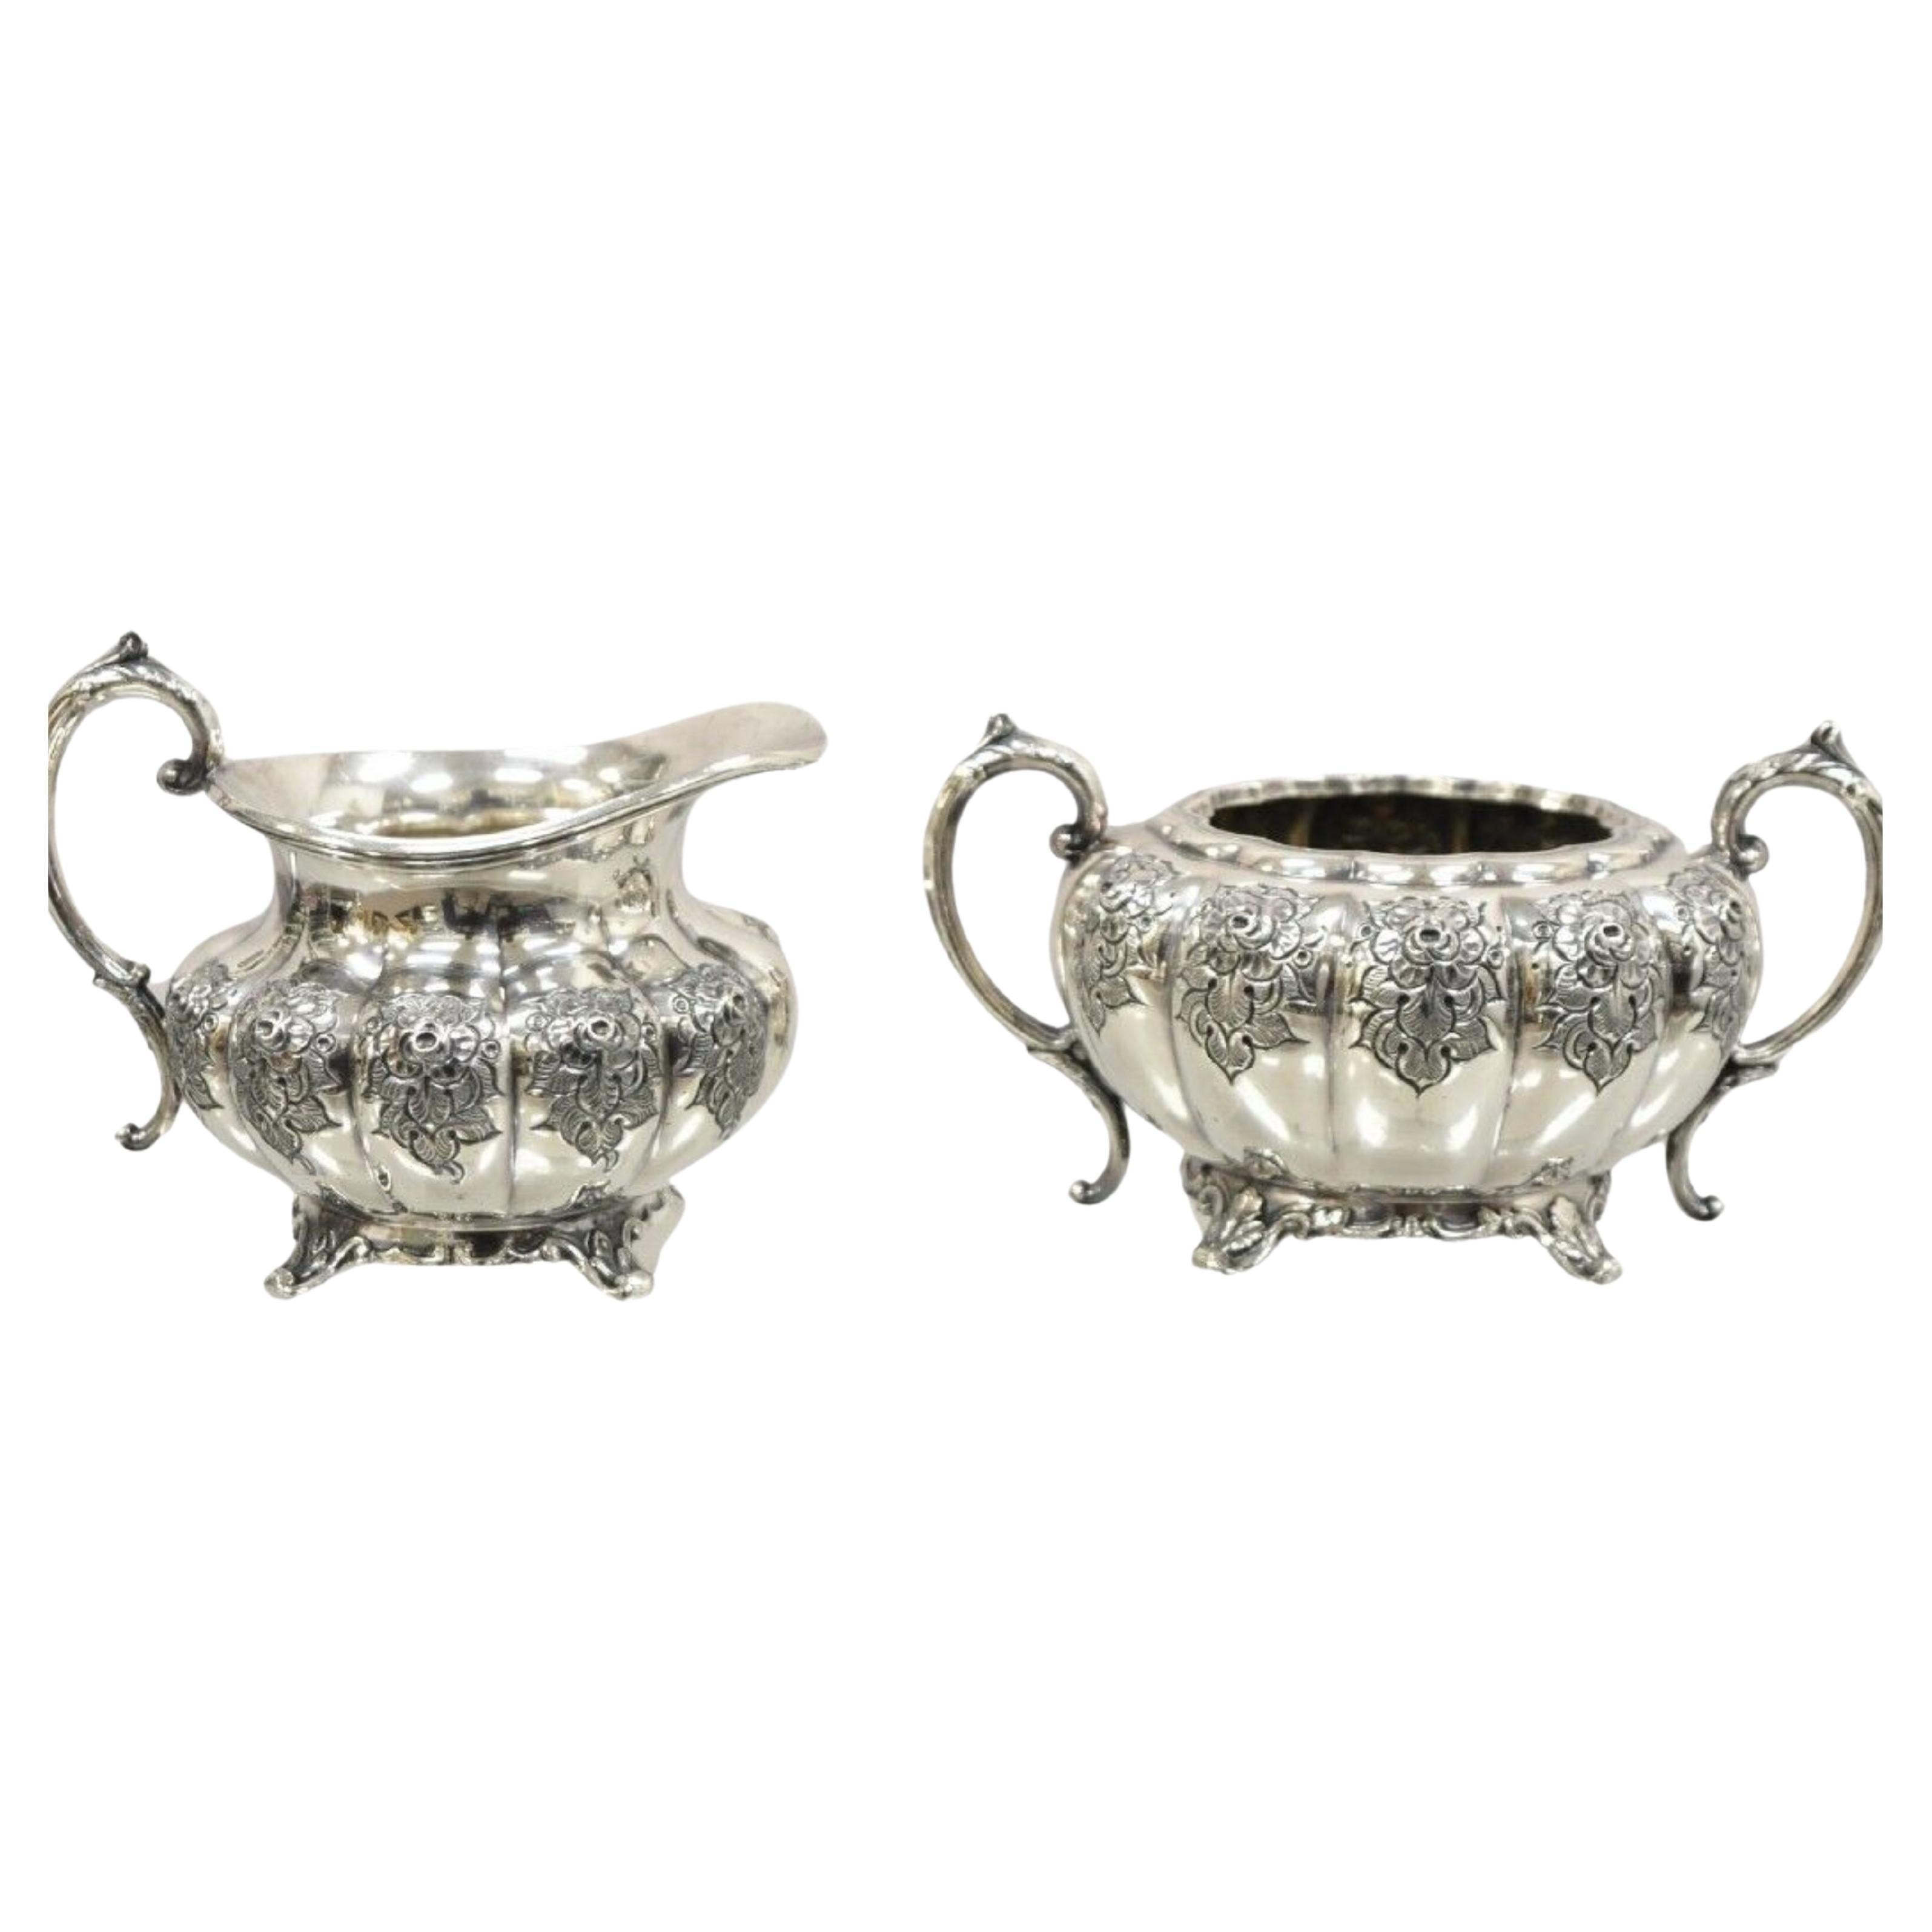 Vintage Victorian 1881 Rogers Canada Silver Plated Sugar Bowl and Creamer Set For Sale